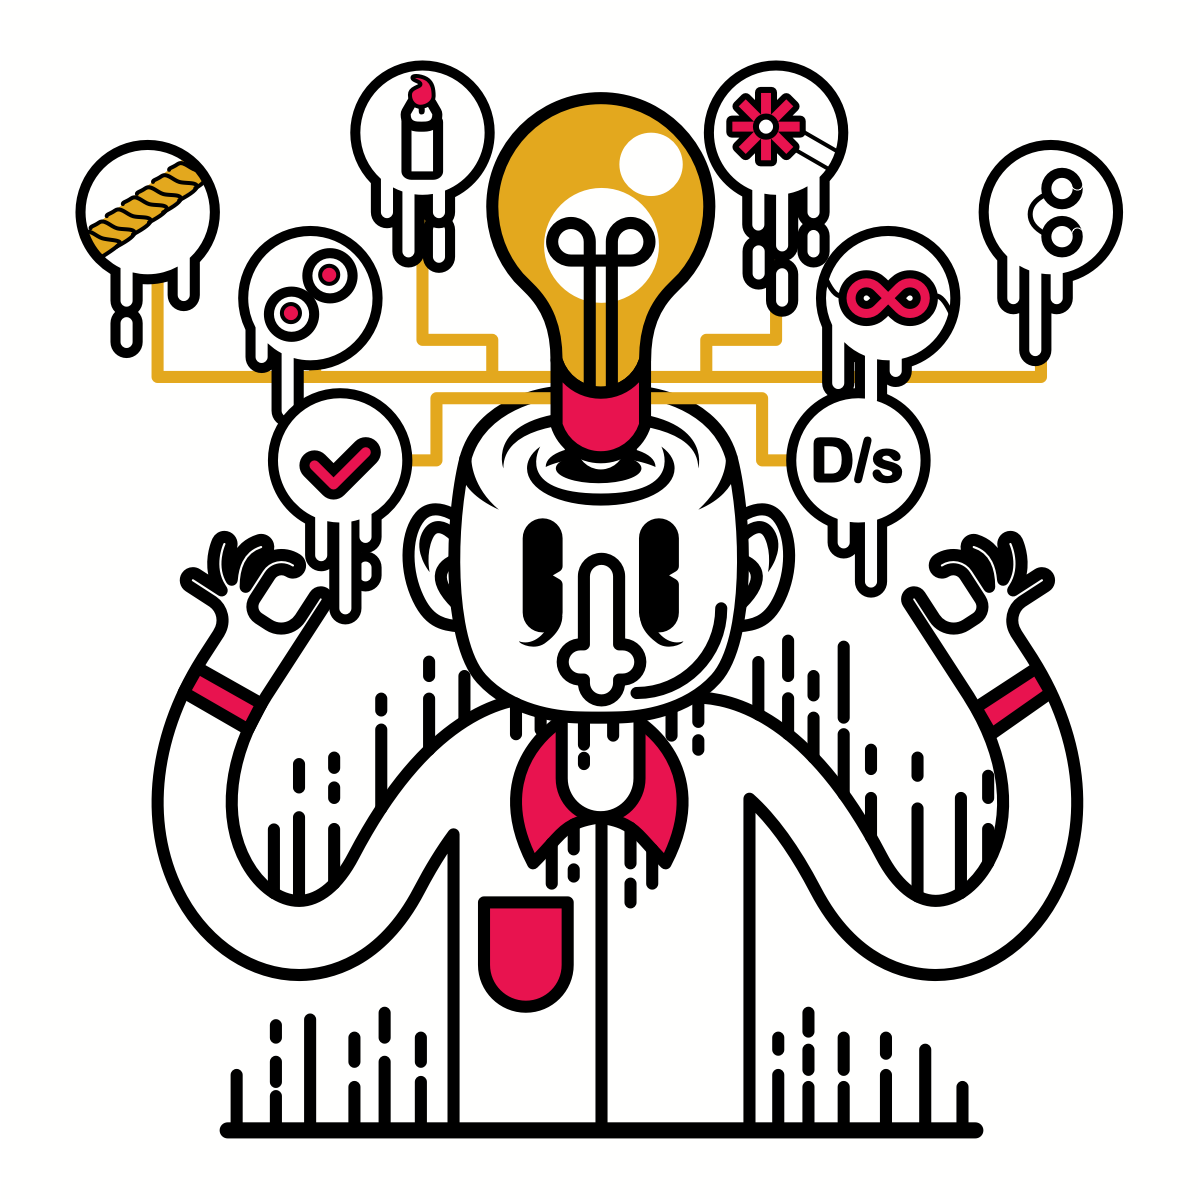 A cartoon person with a myriad of ideas floating around his head, including D/s, a candle, handcuffs, rope and more.